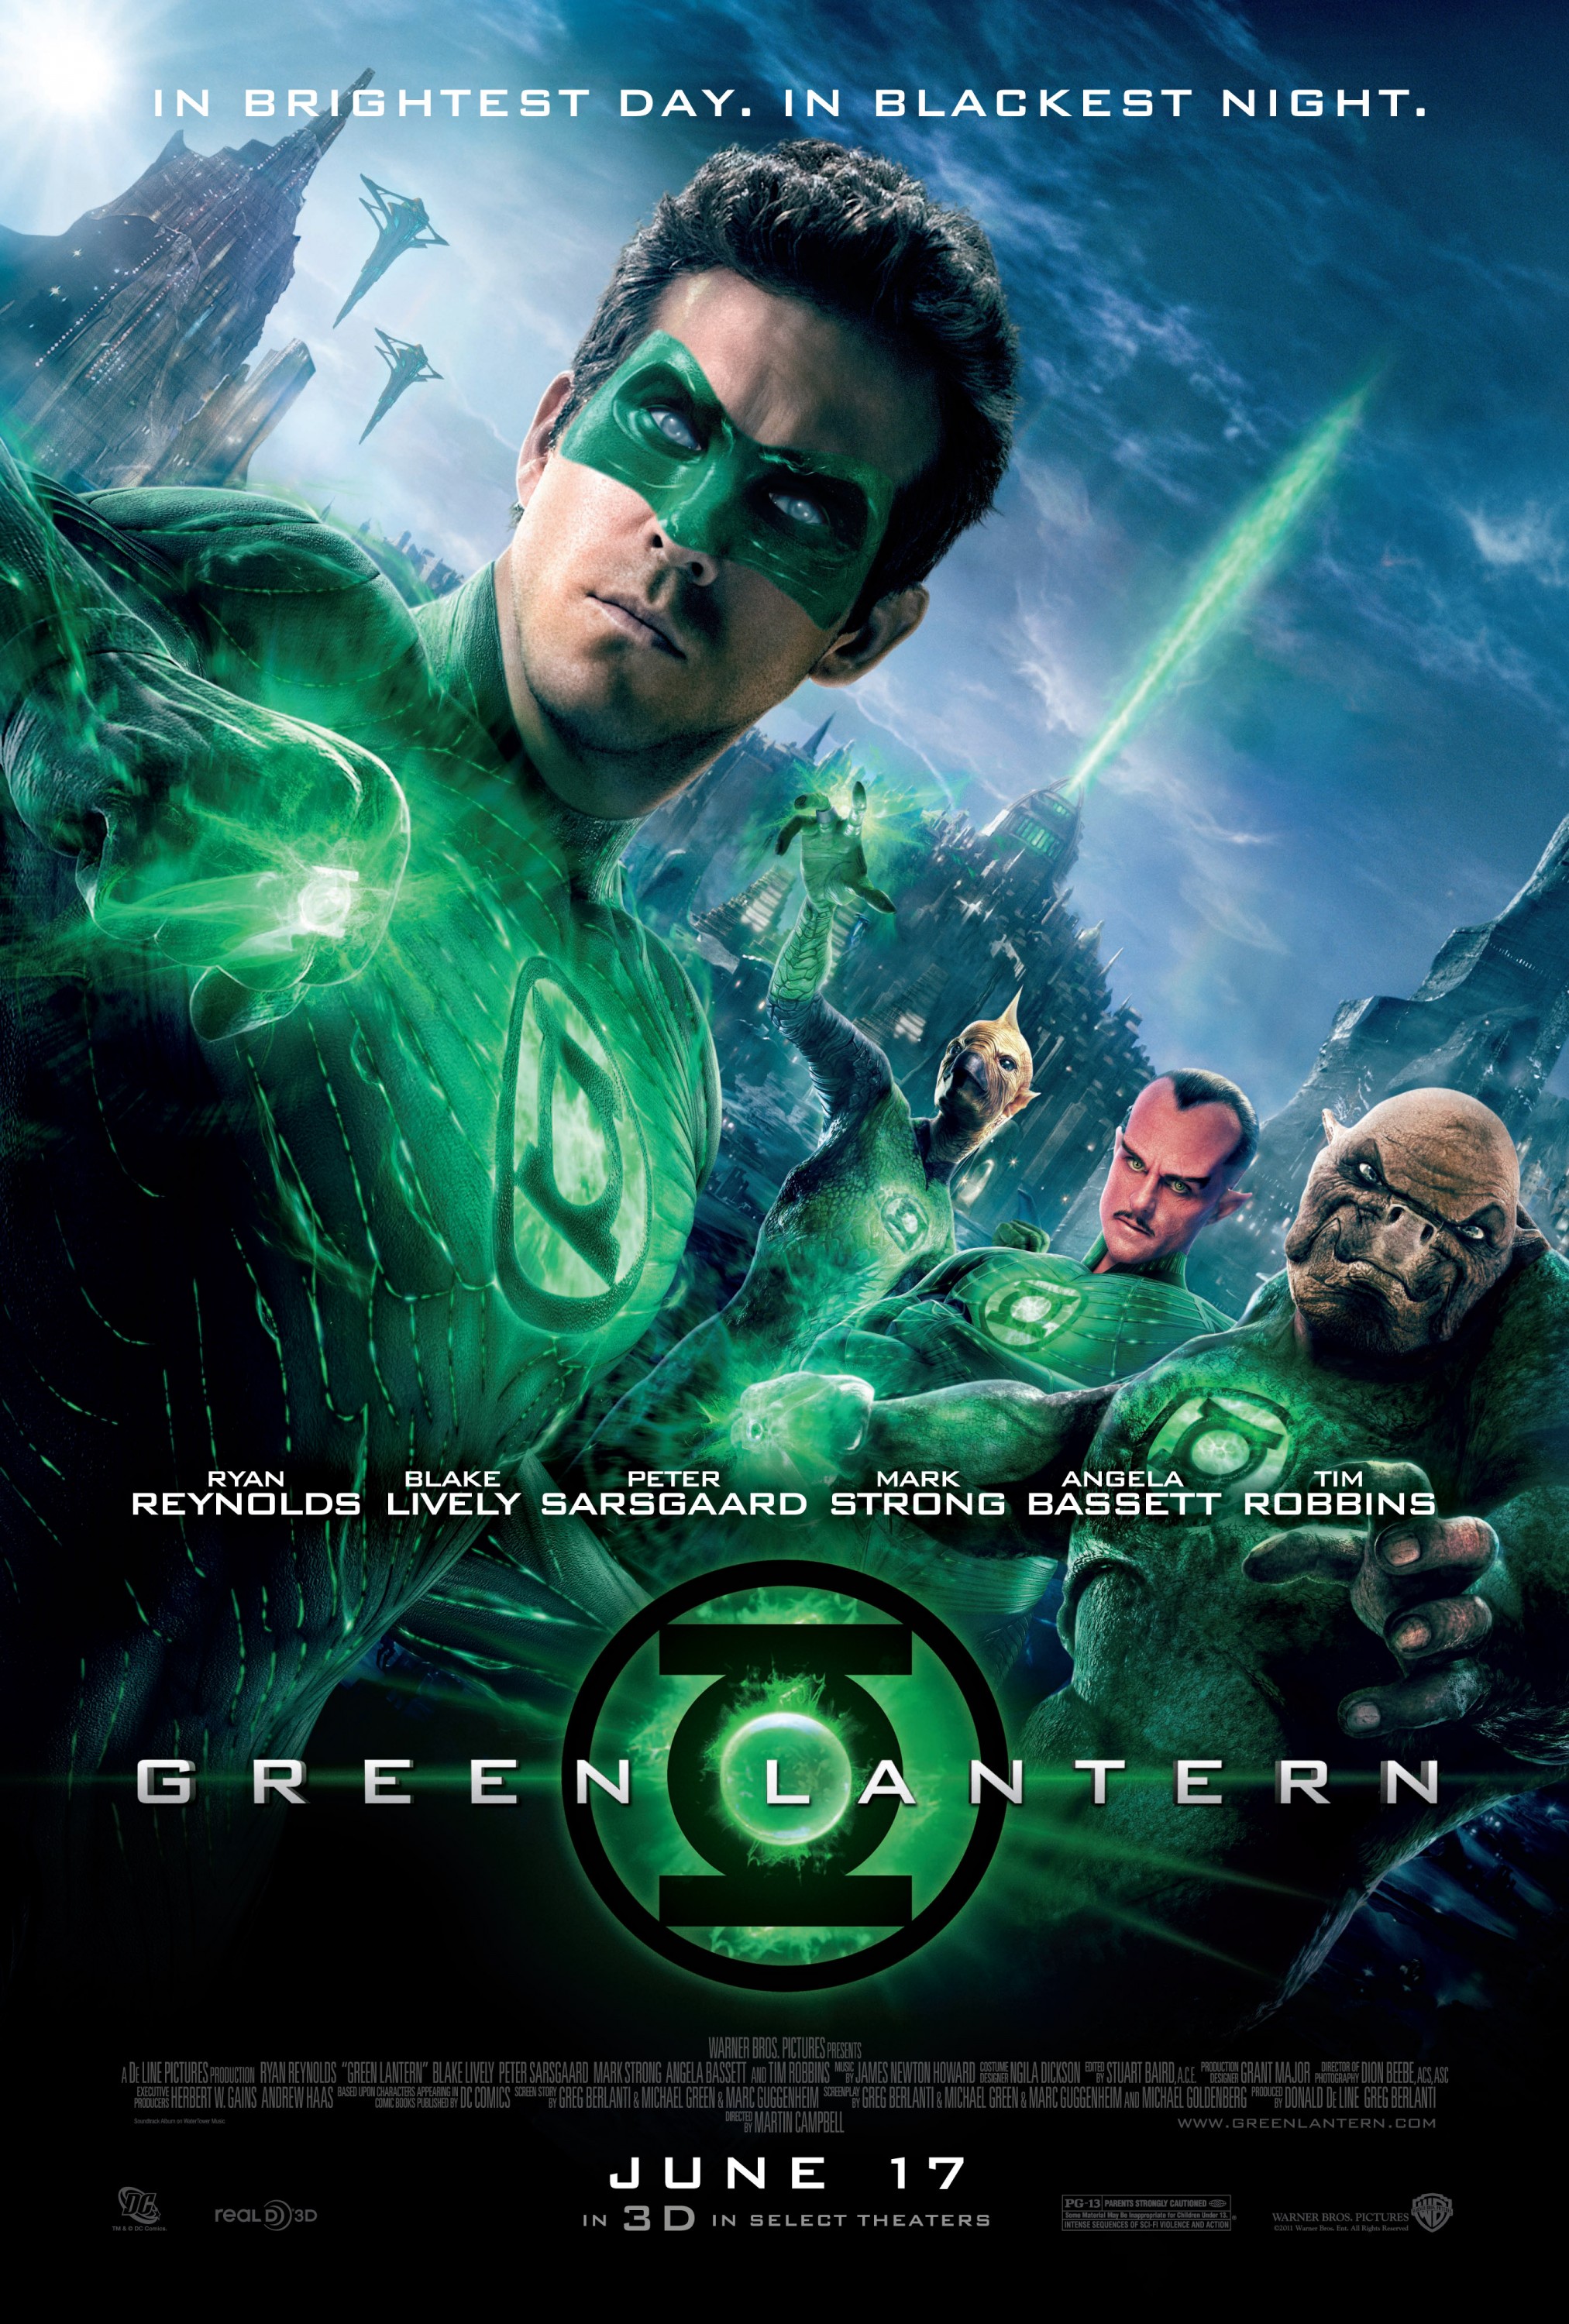 will there be a green lantern movie